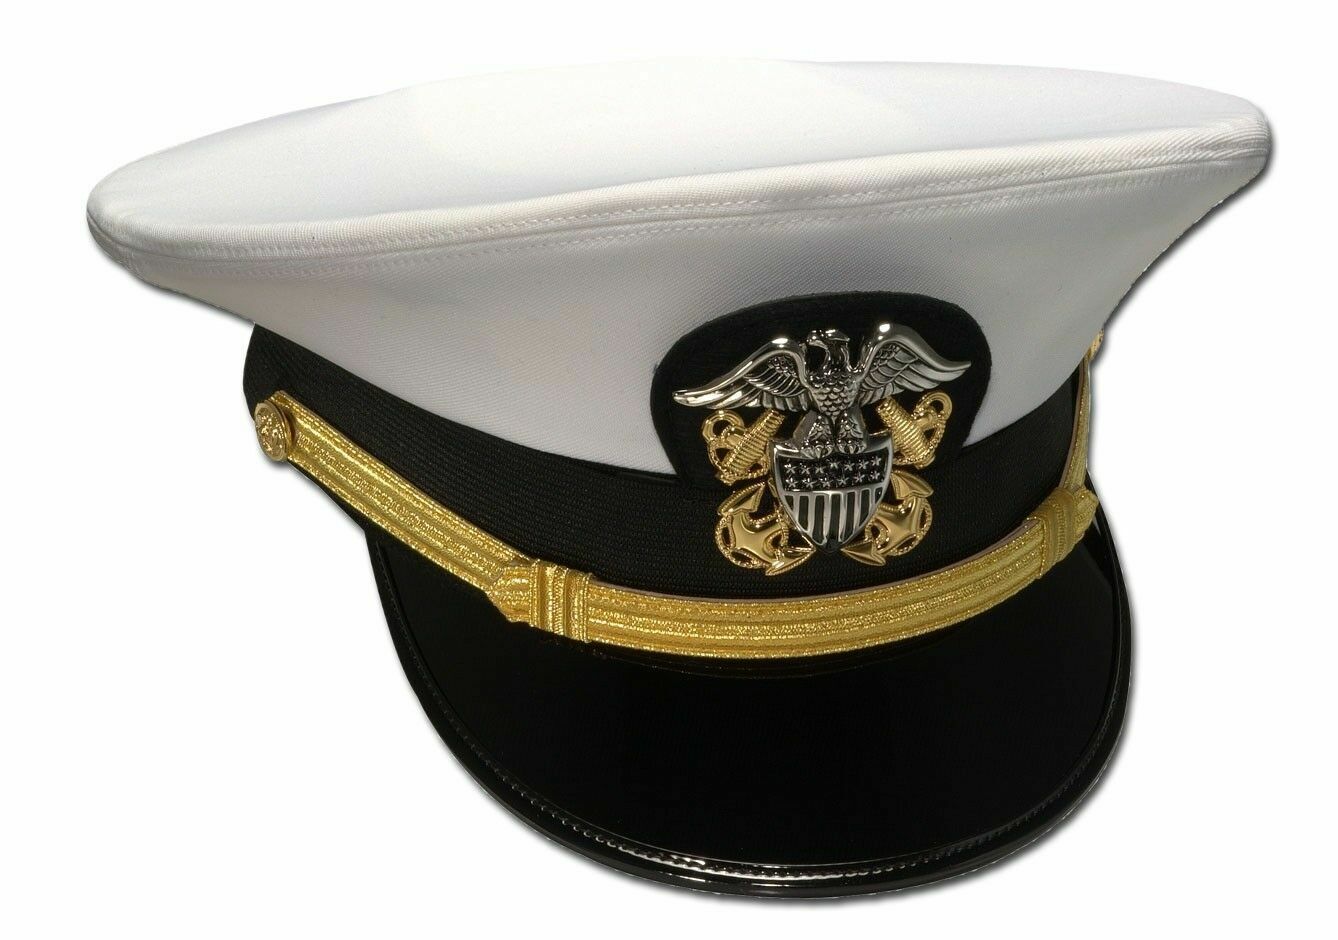 USA Navy officer Hat White Limited OFFER US$45 from US$55